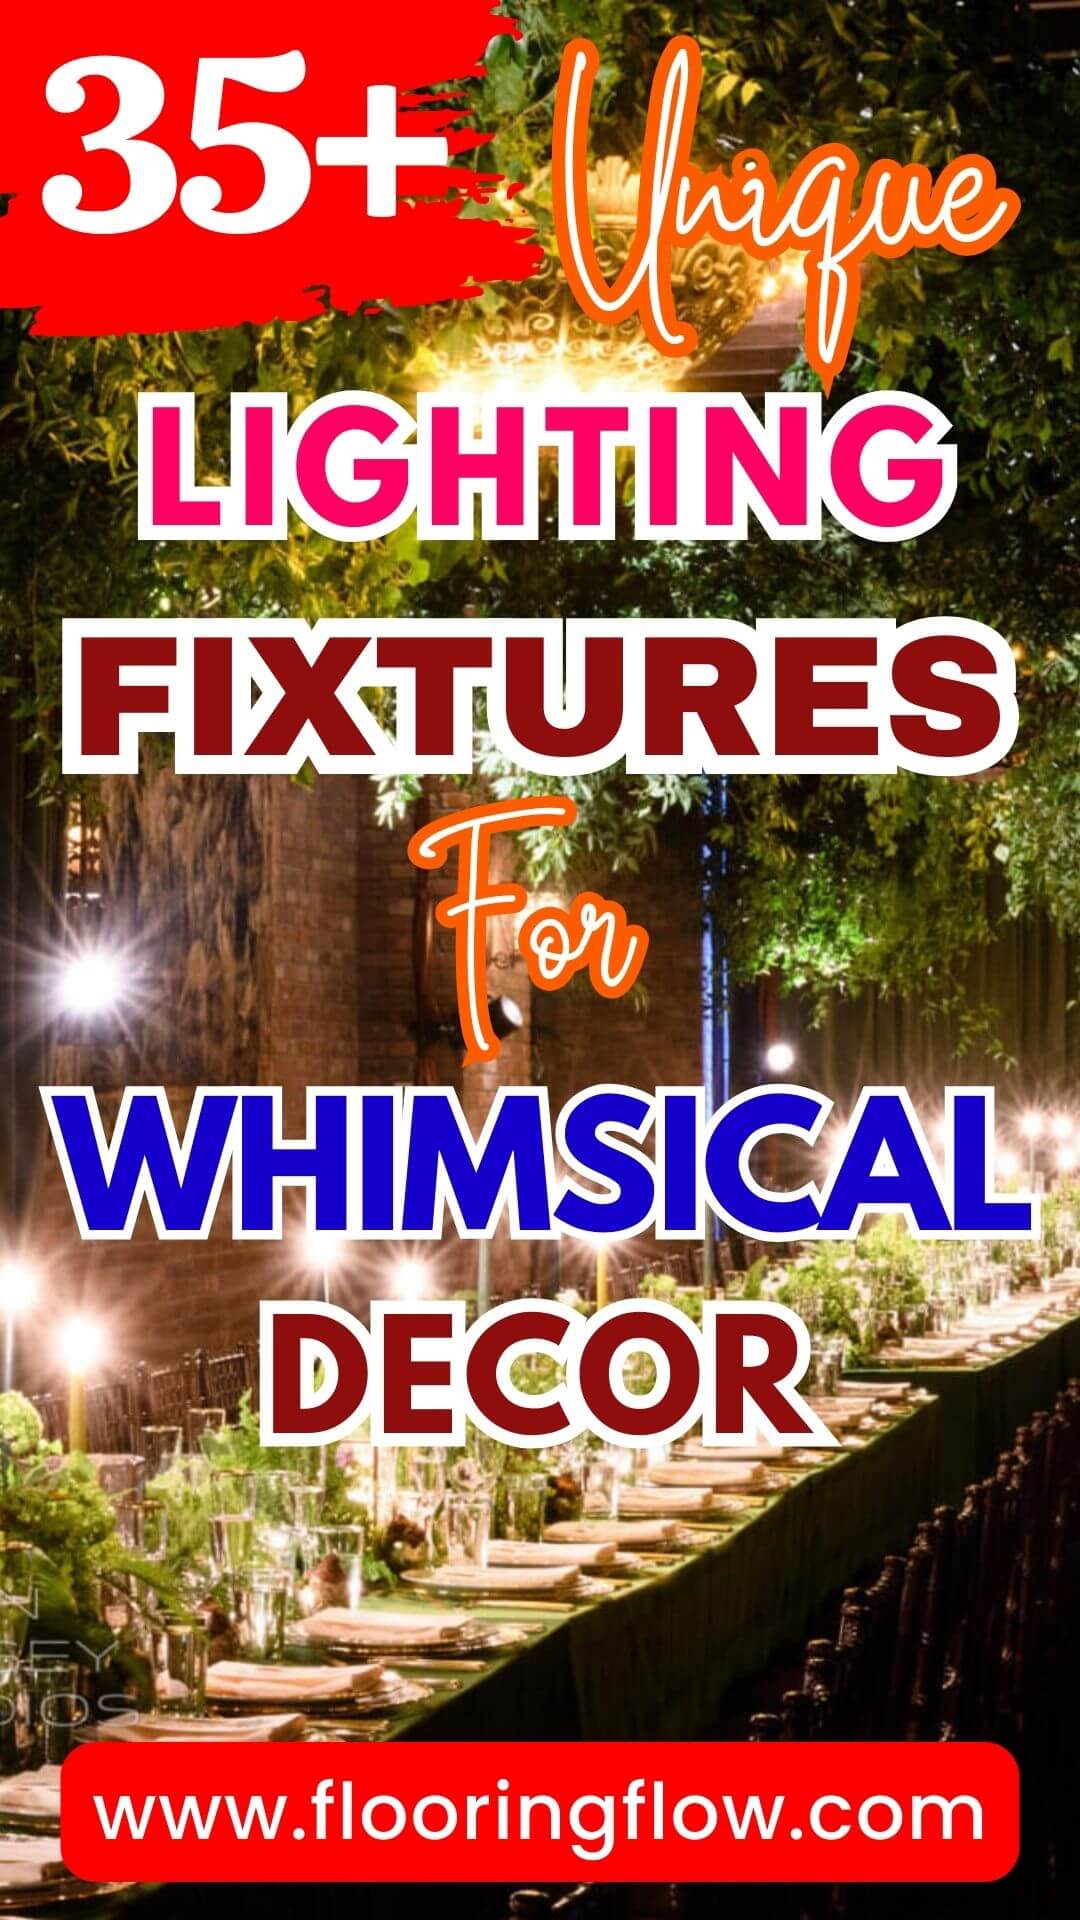 Unique Lighting Fixtures for Whimsical Decor